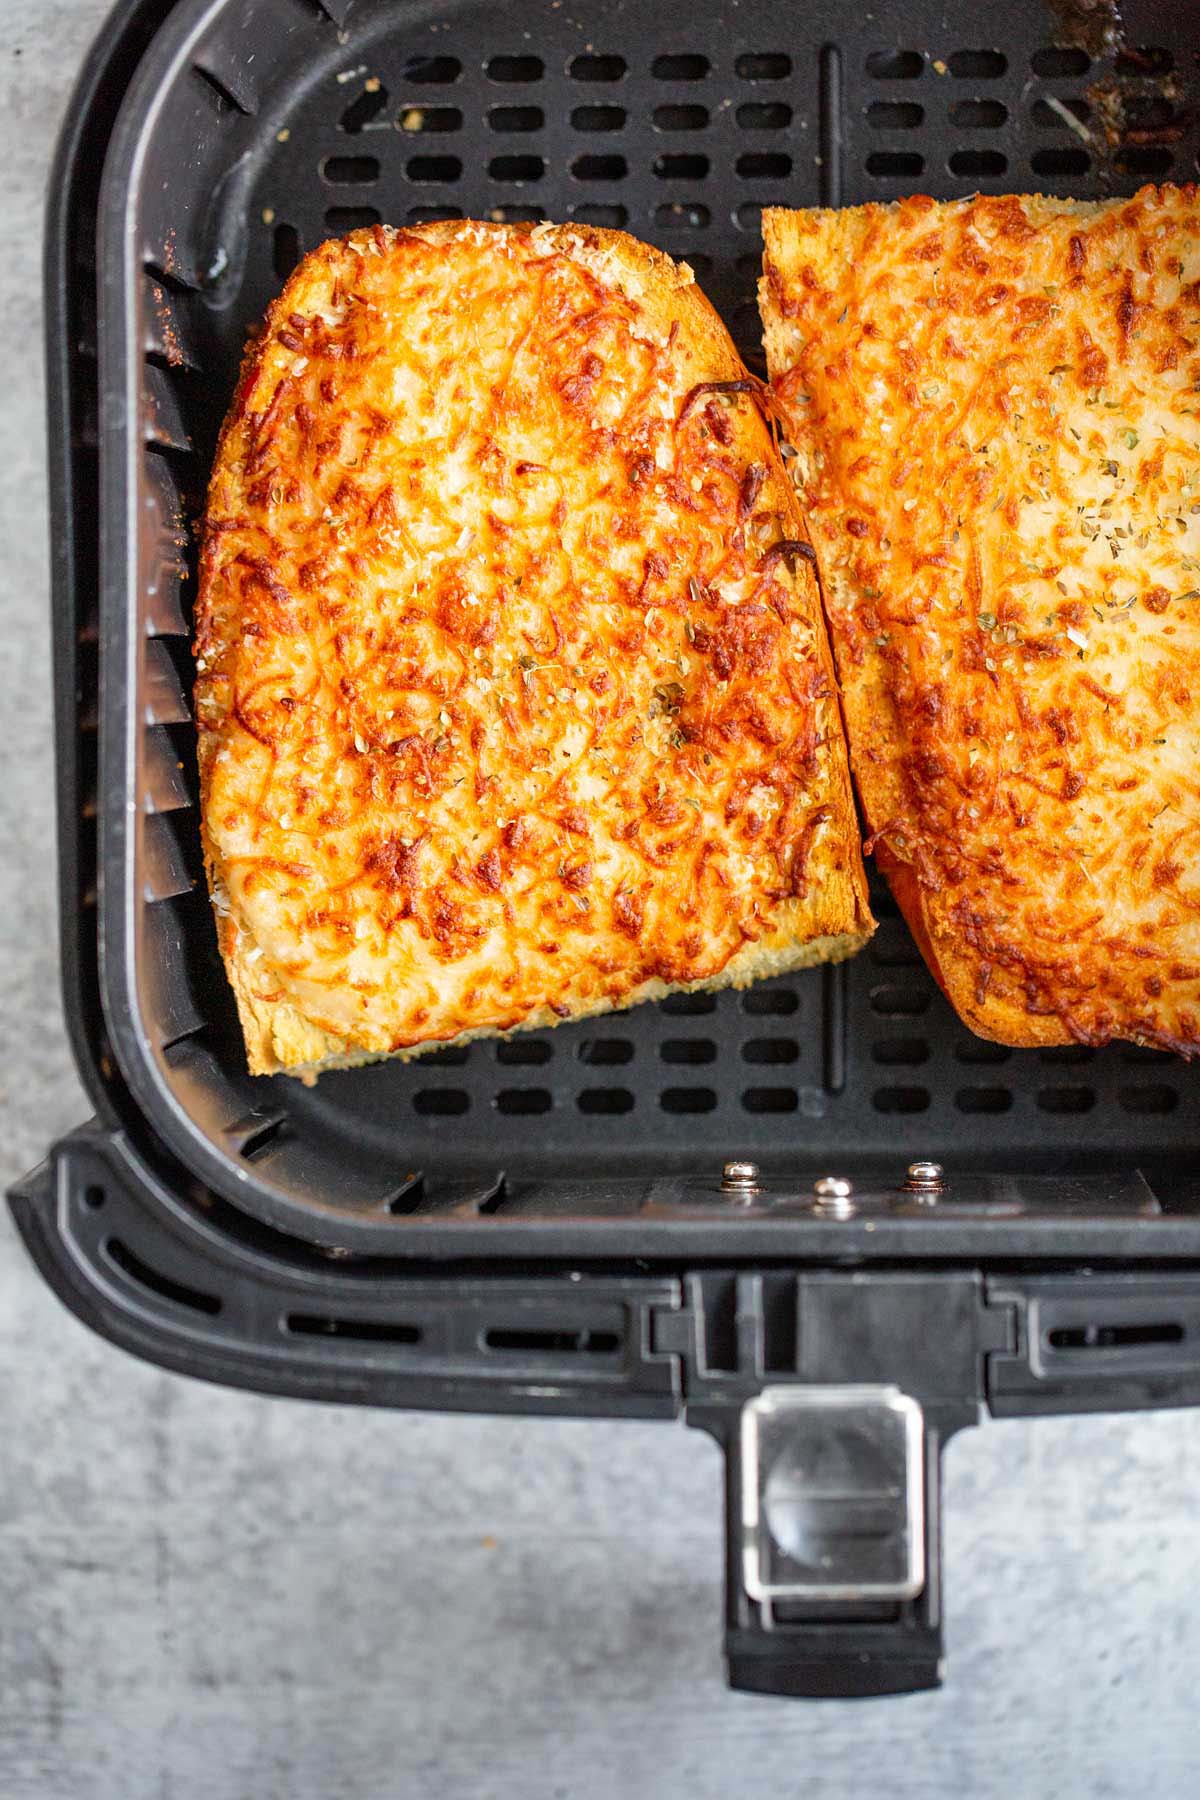 Cooked cheesy garlic bread in air fryer basket.